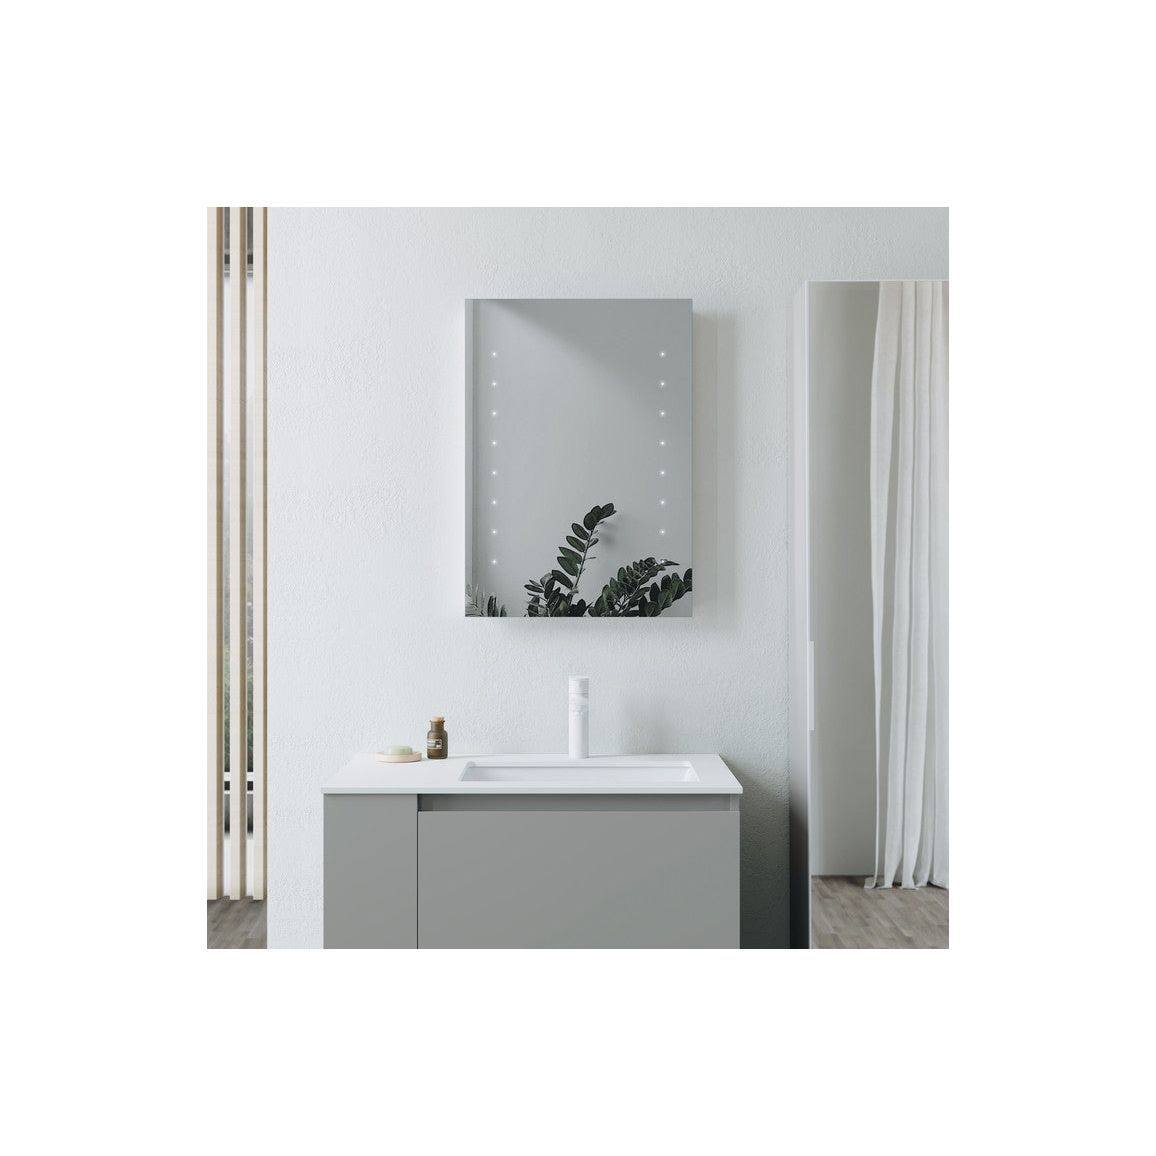 Lena 500x700mm Rectangle Battery-Operated LED Mirror